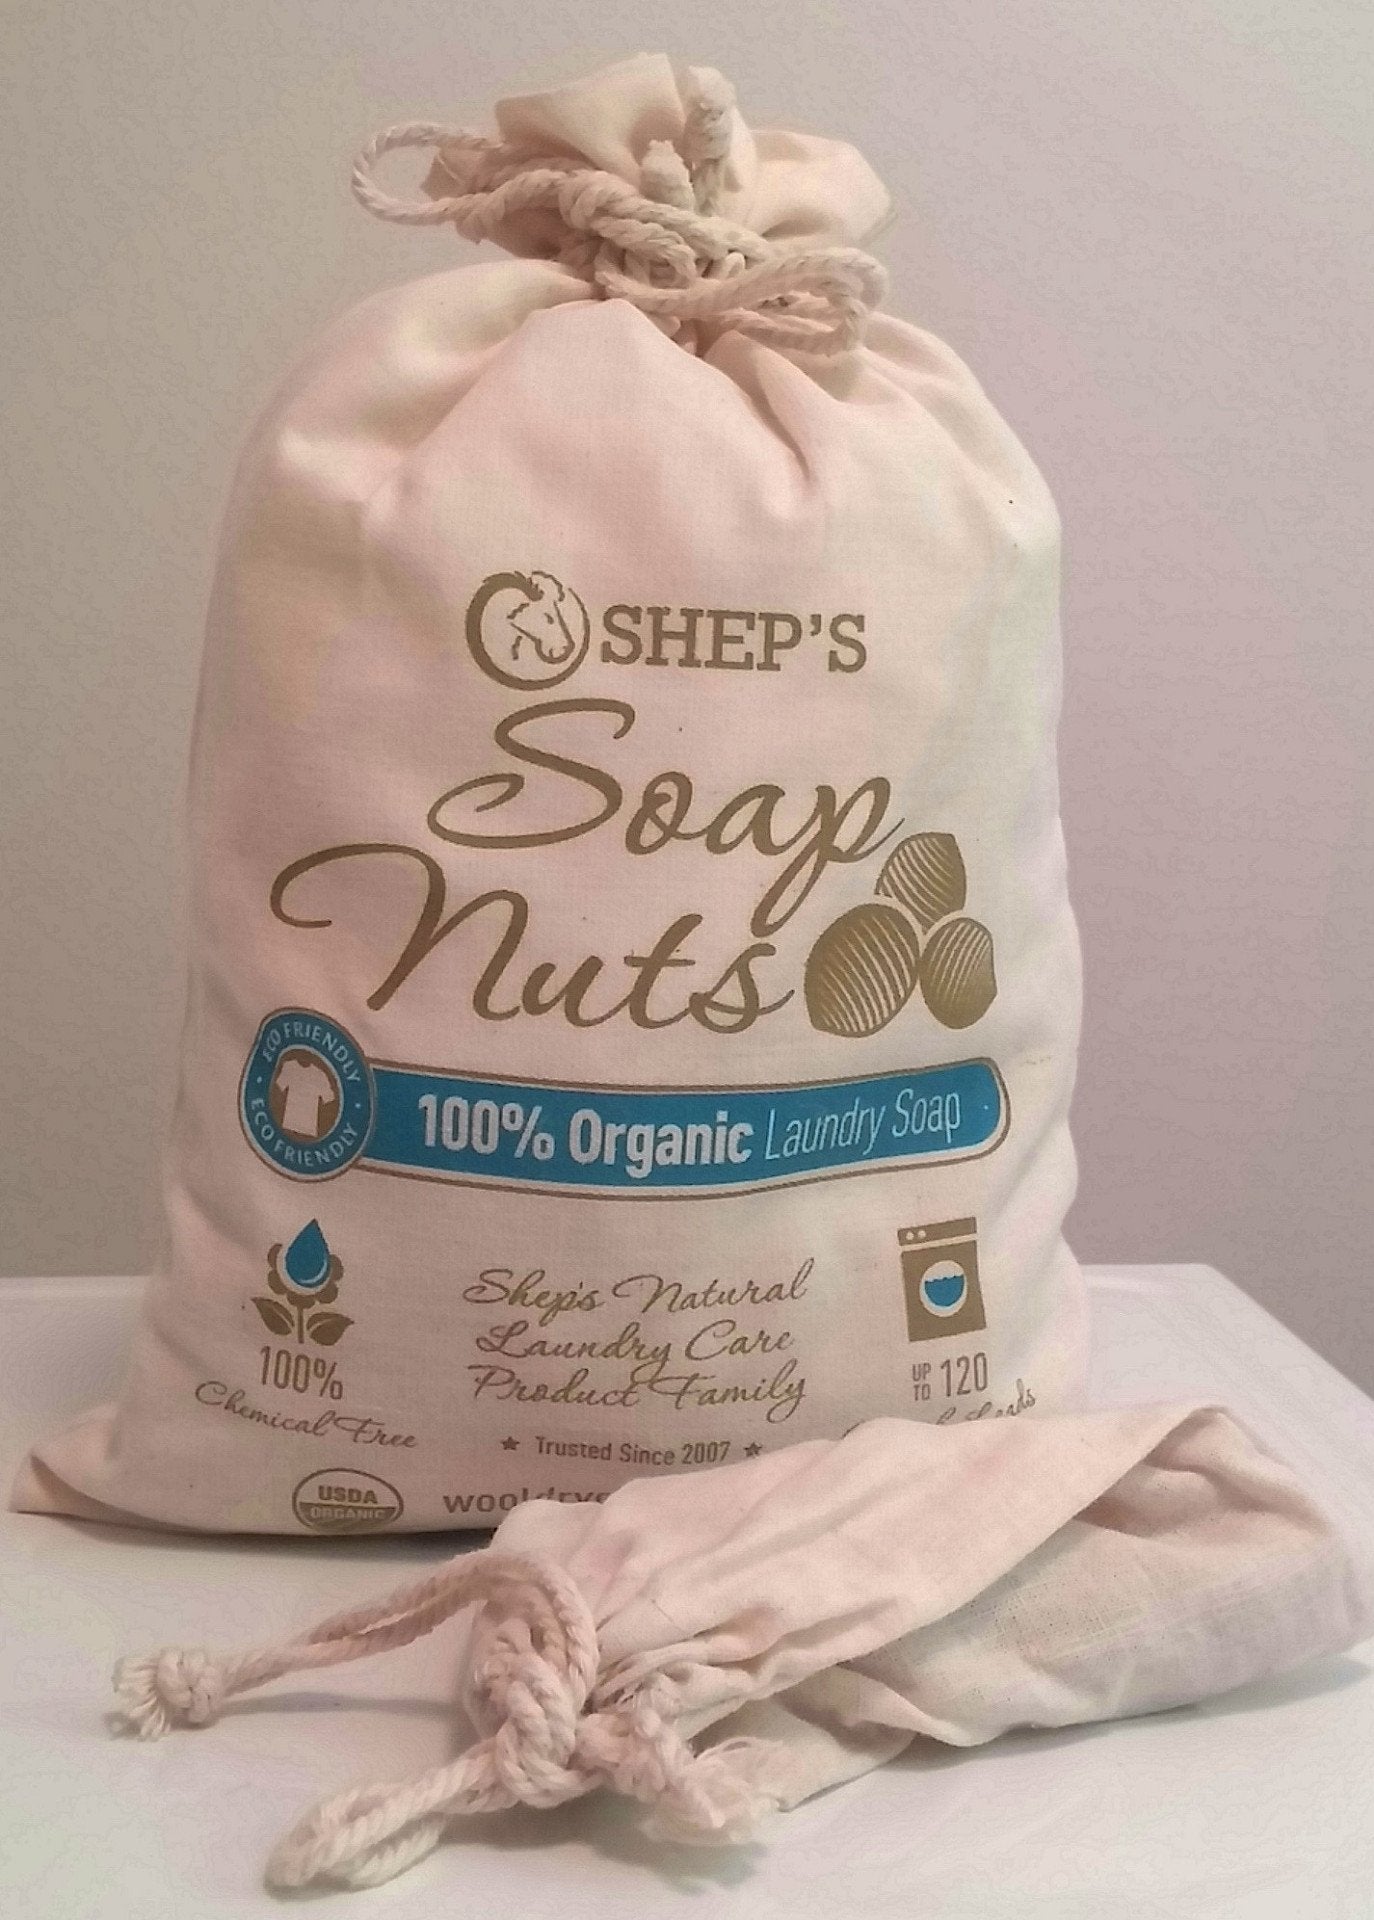 Shep's soap nuts offers natural laundry detergent in soap nut form. Wash laundry up to 4 times with the same soap nuts in the wash bag provided and then compost the used soap berries. Follow up with Shep's Wool Dryer Balls in the dryer for faster drying time and soft laundry done Naturally.